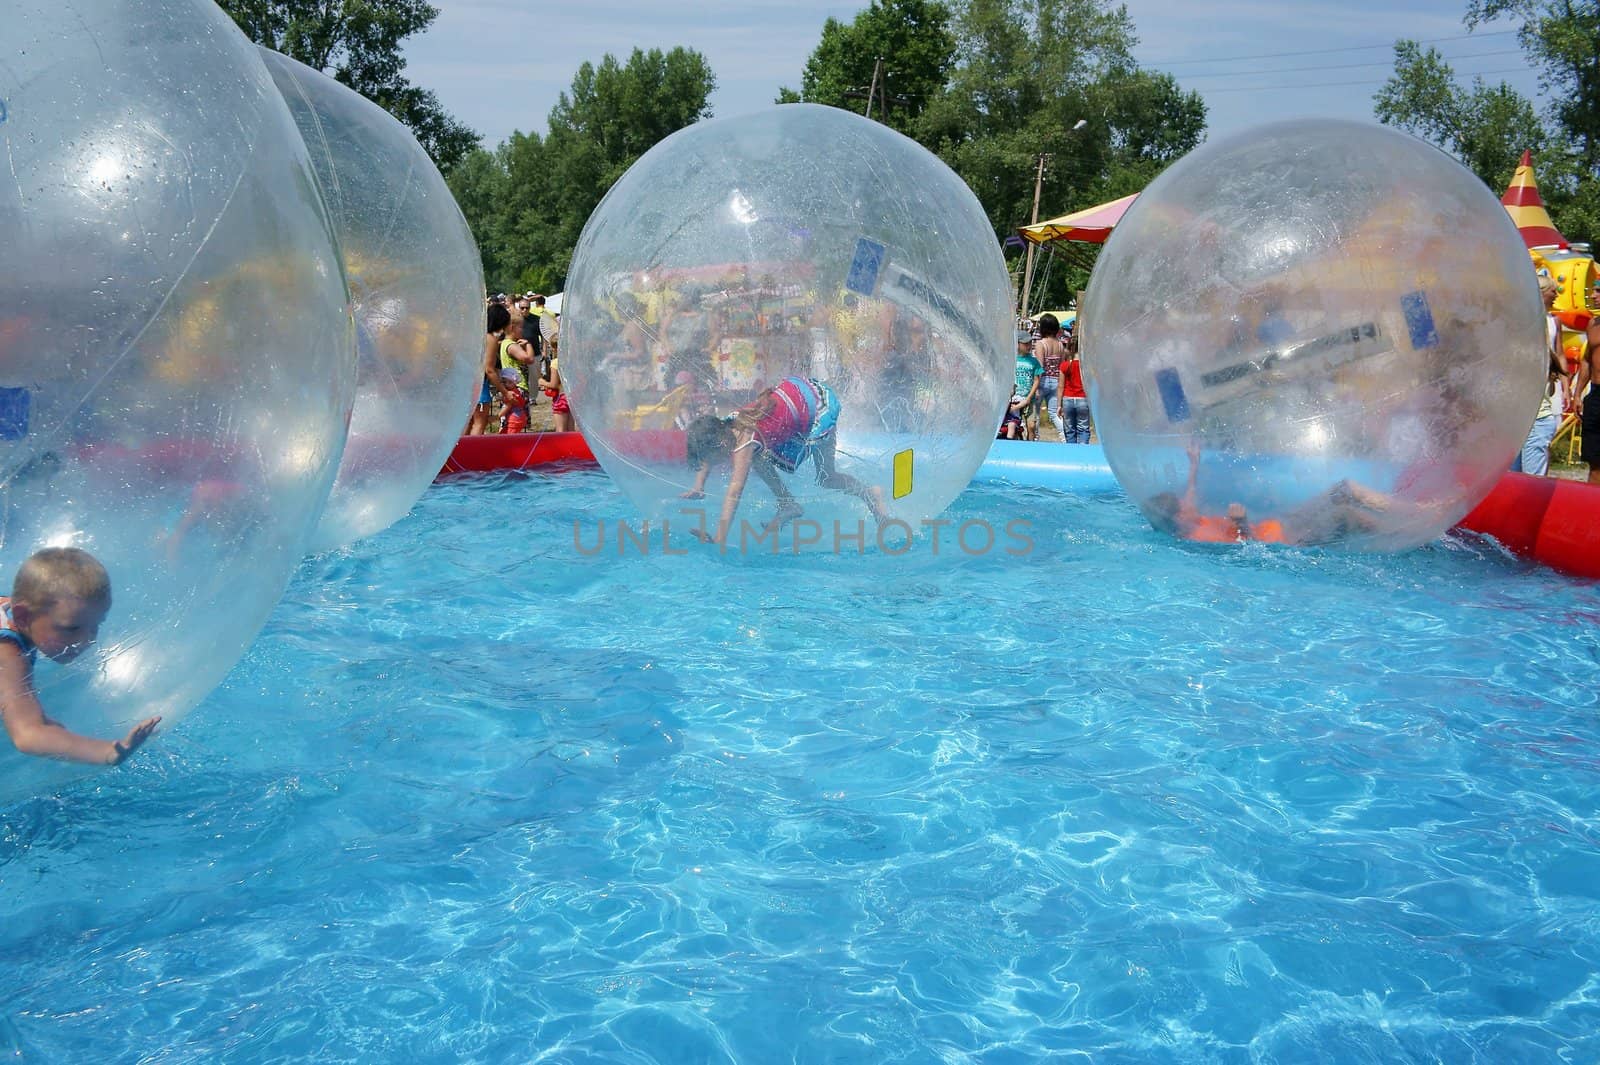 Children riding in a large zorb balls in the pool on a summer day.